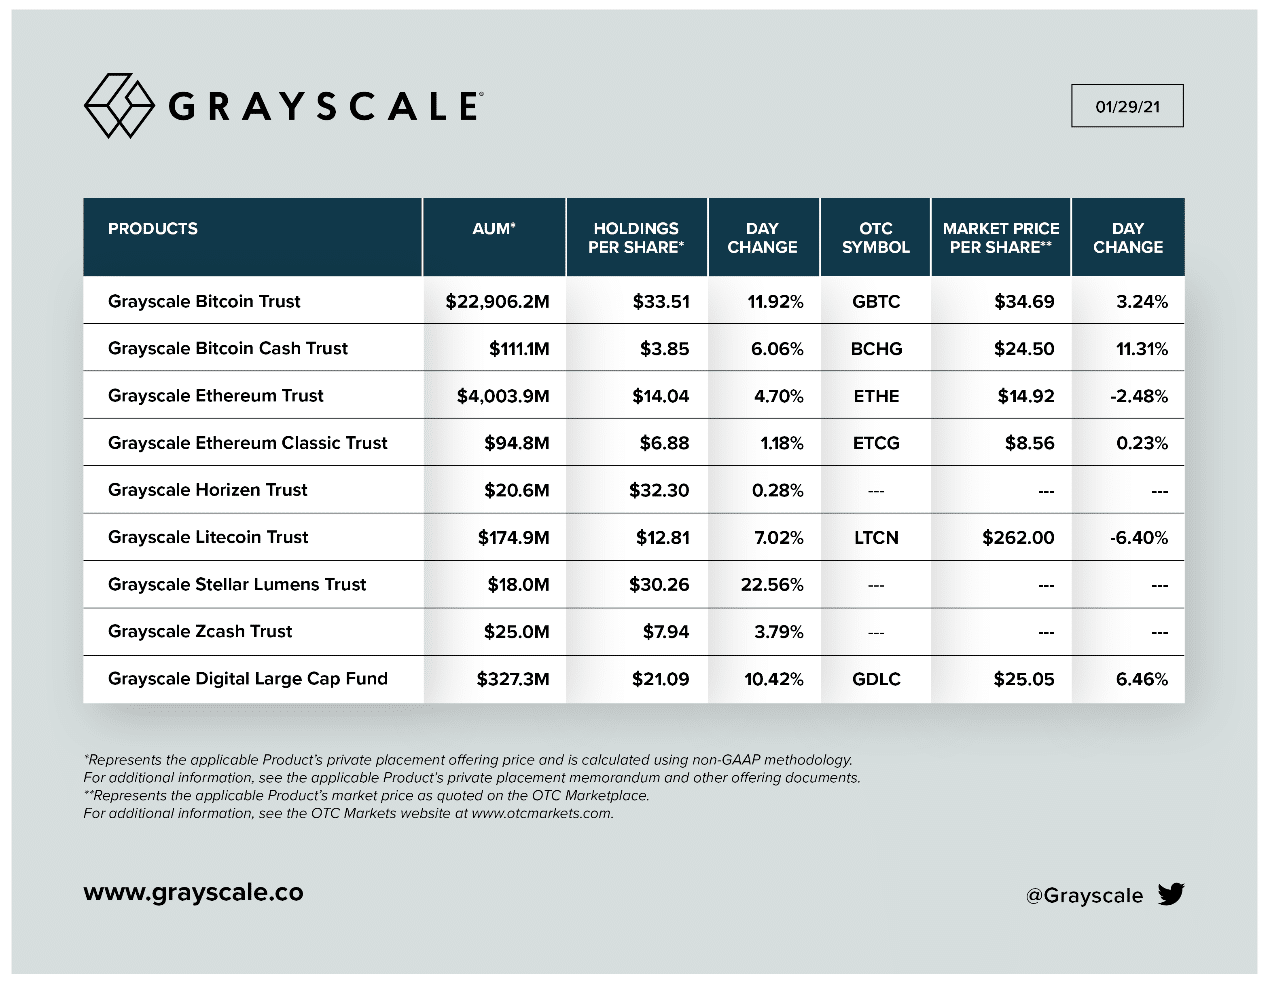 Bityard Launched 'Grayscale Zone' to Let Users Trade Coins Related to Grayscale Investment Trusts